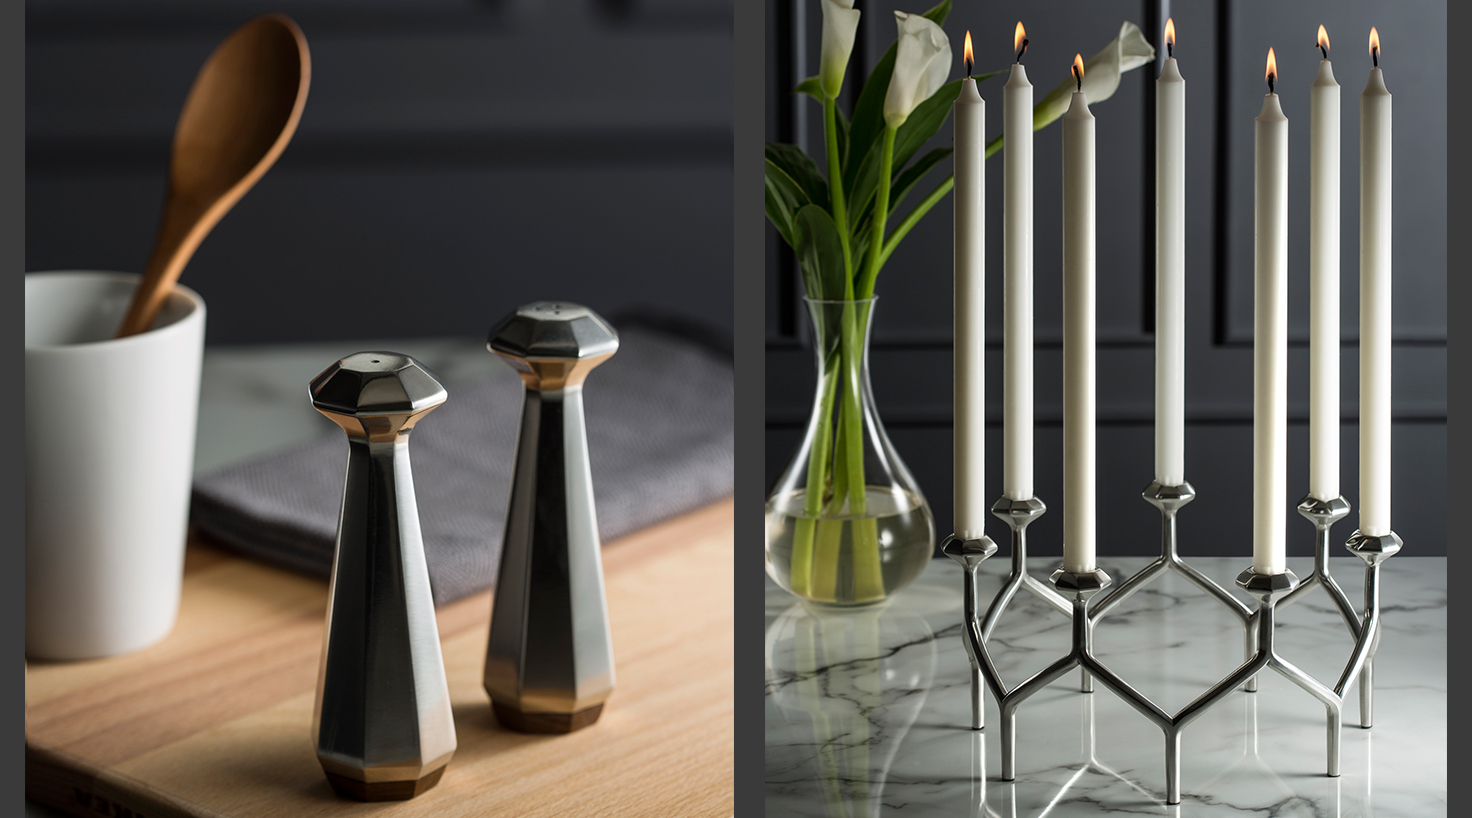 Salt and Pepper and candle holder.jpg